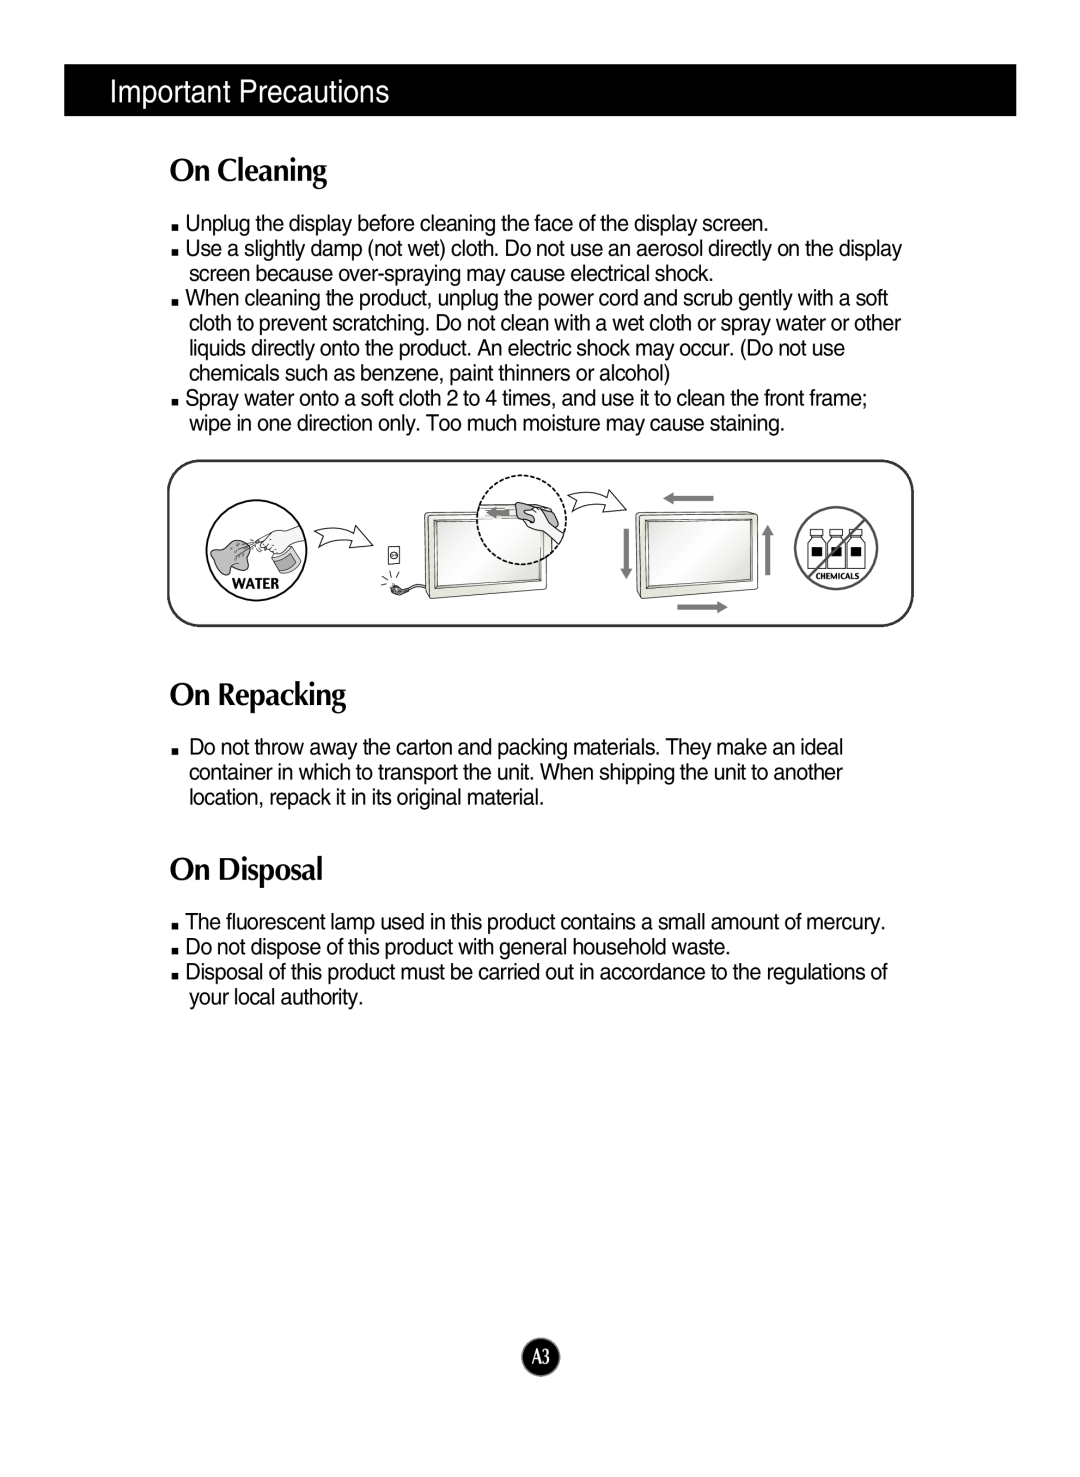 LG Electronics T1910B, T1710B owner manual On Cleaning, On Repacking, On Disposal, Important Precautions 